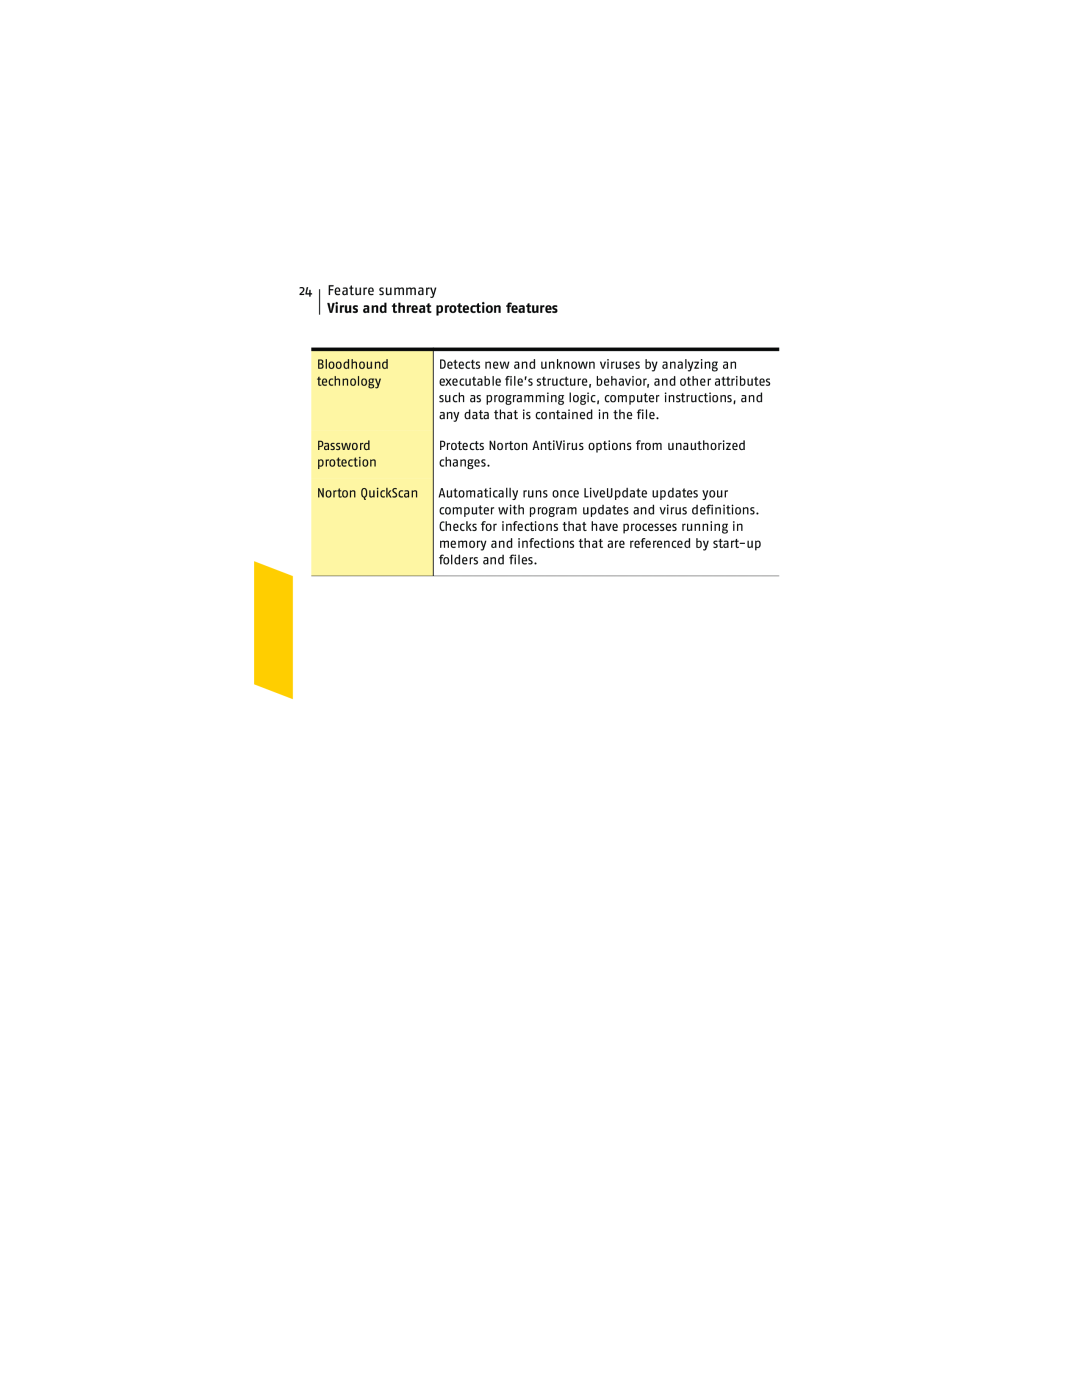 Symantec NIS2005 manual 24Feature summary, Virus and threat protection features 